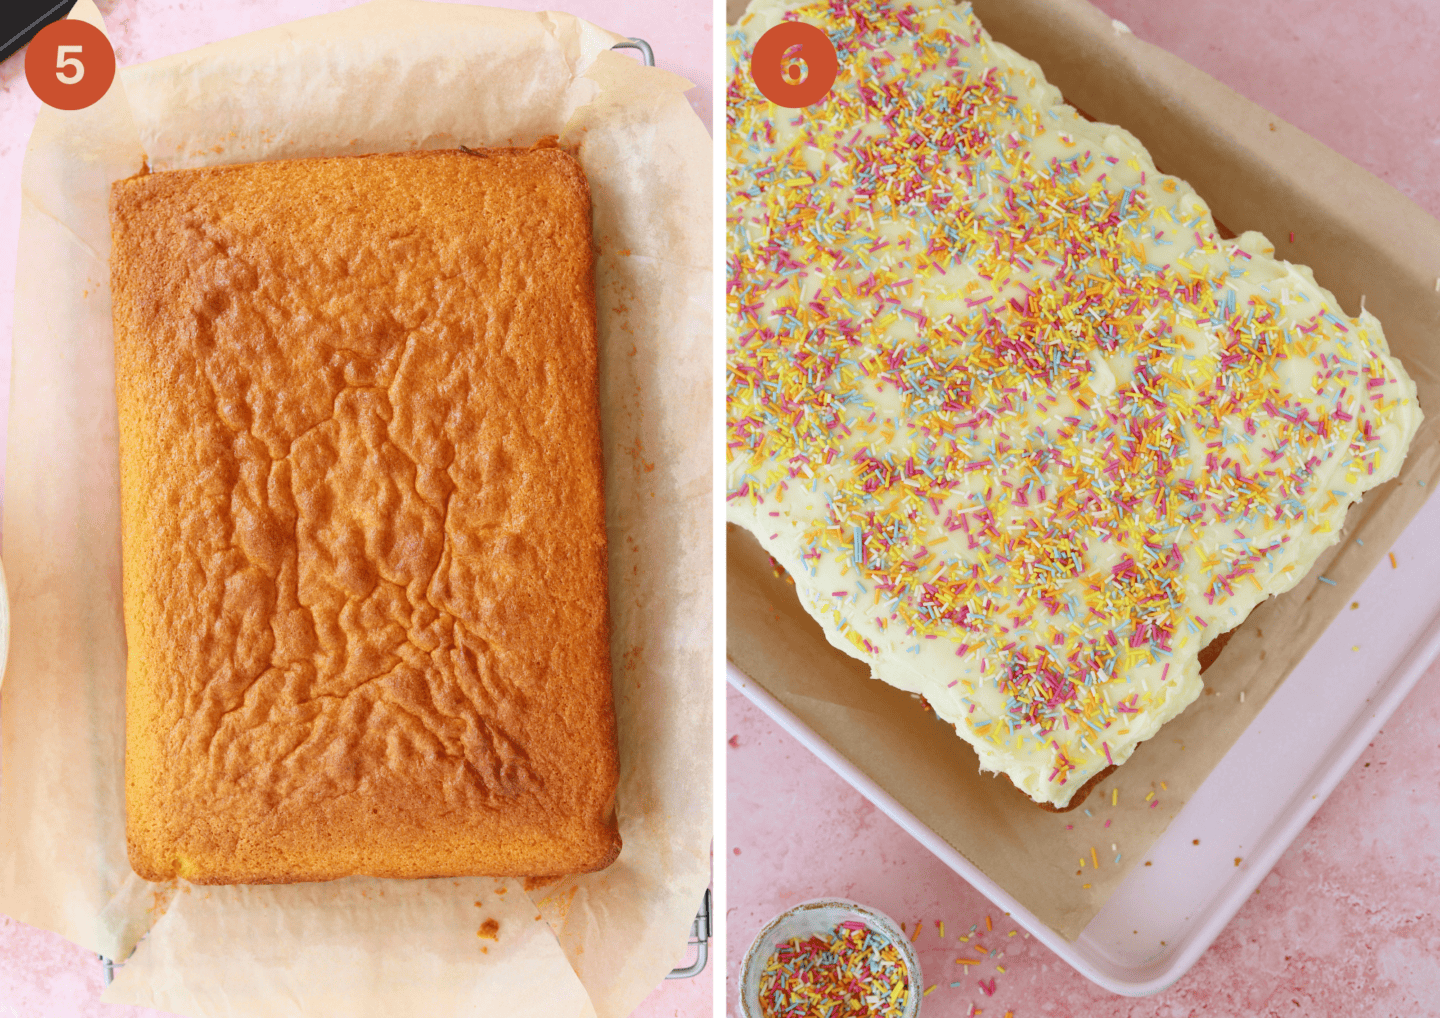 leave the baked vanilla tray bake to cool then decorate with buttercream frosting and sprinkles.